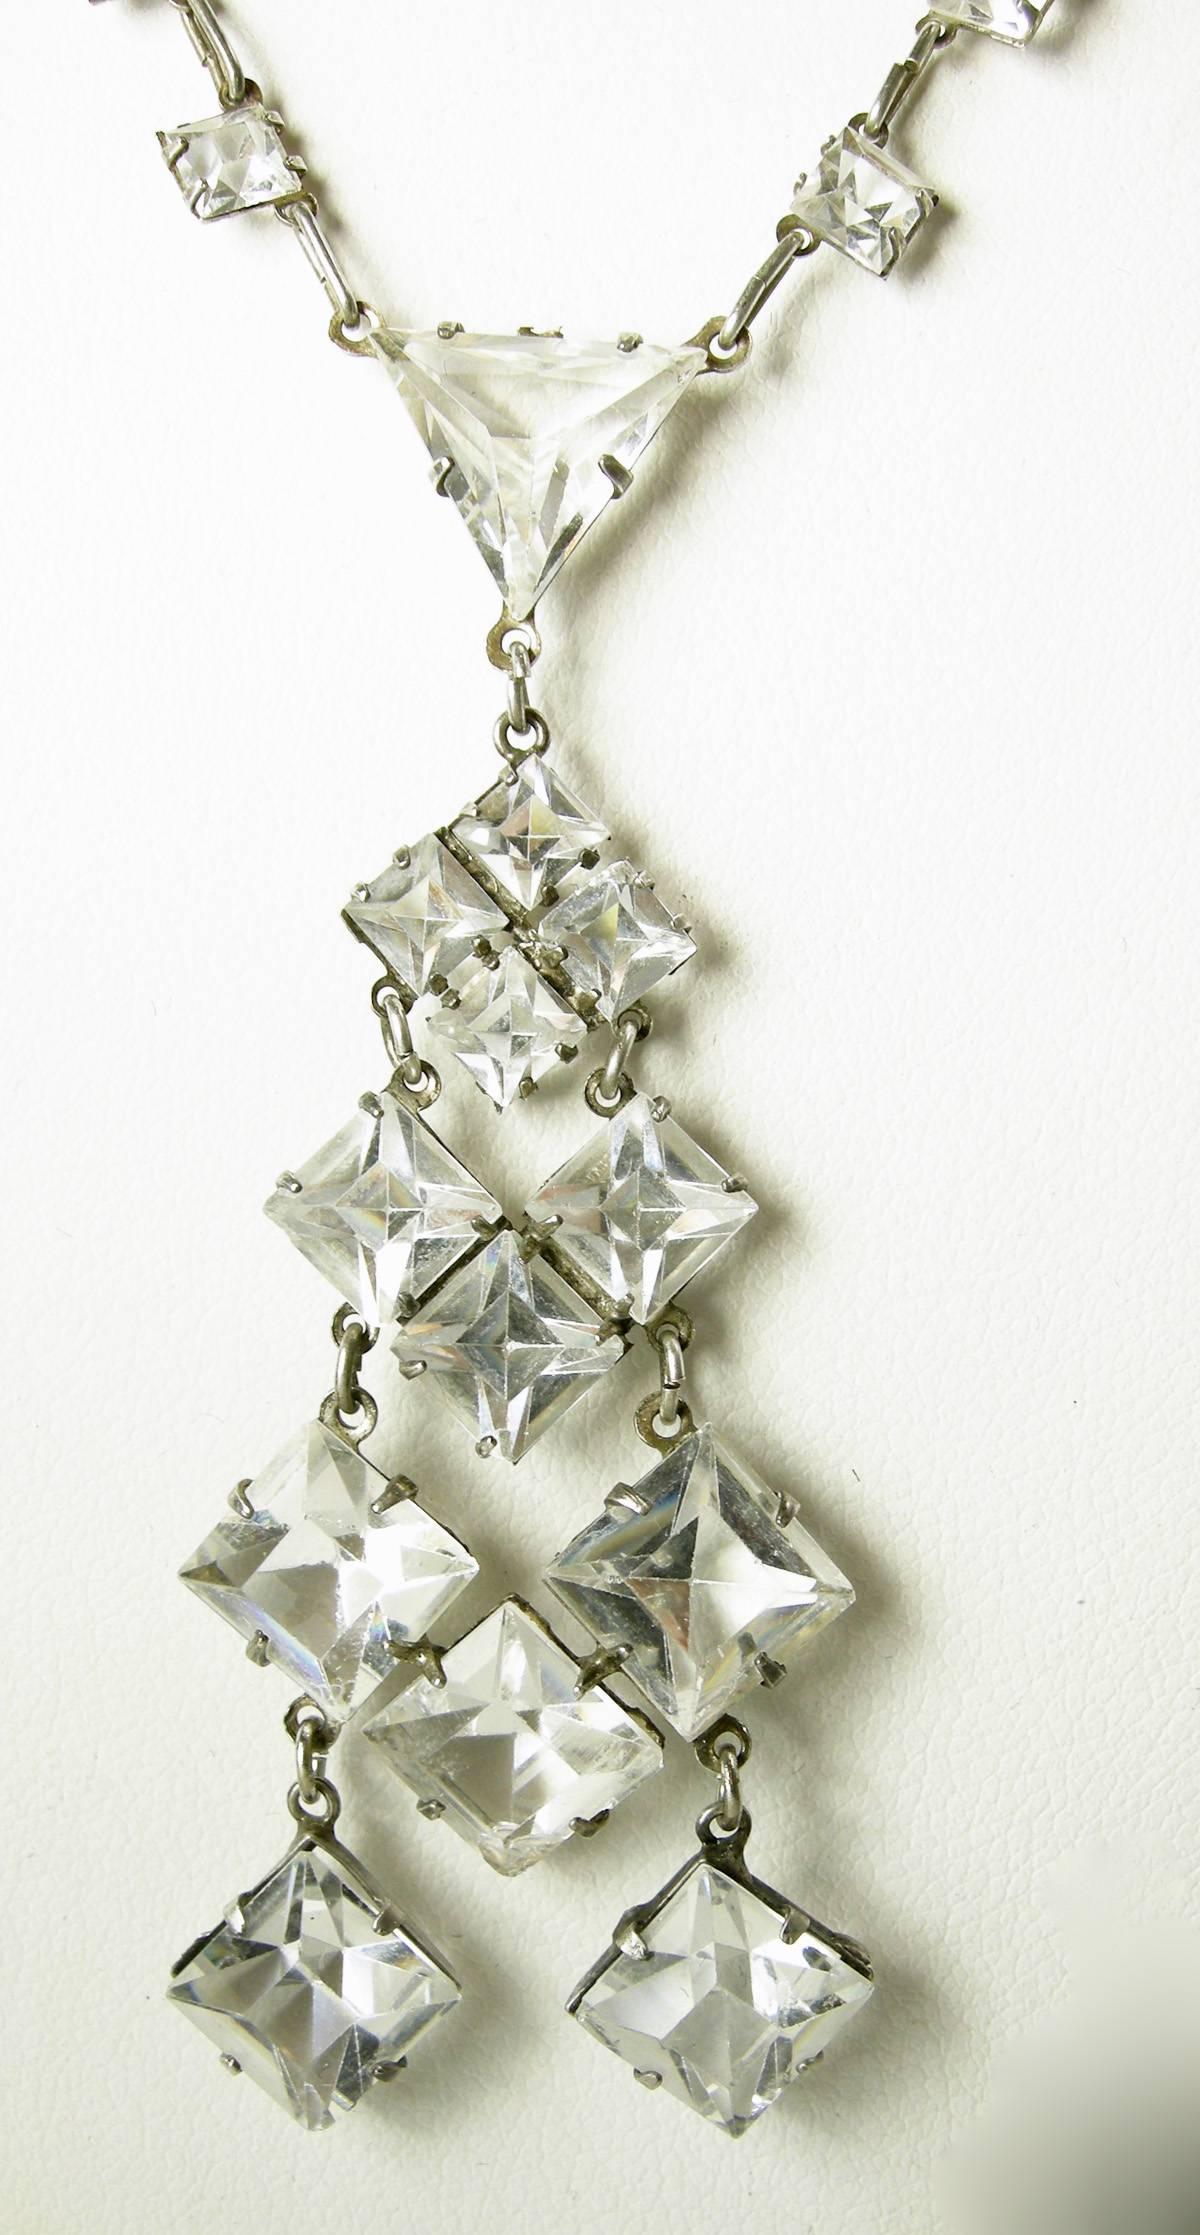 This stunning 1920s Deco crystal necklace is made with geometrical square crystals dangling from a sterling silver necklace accented with crystals all the way to the centerpiece.  The necklace measures 17” and the centerpiece is 2-1/2”. It is signed